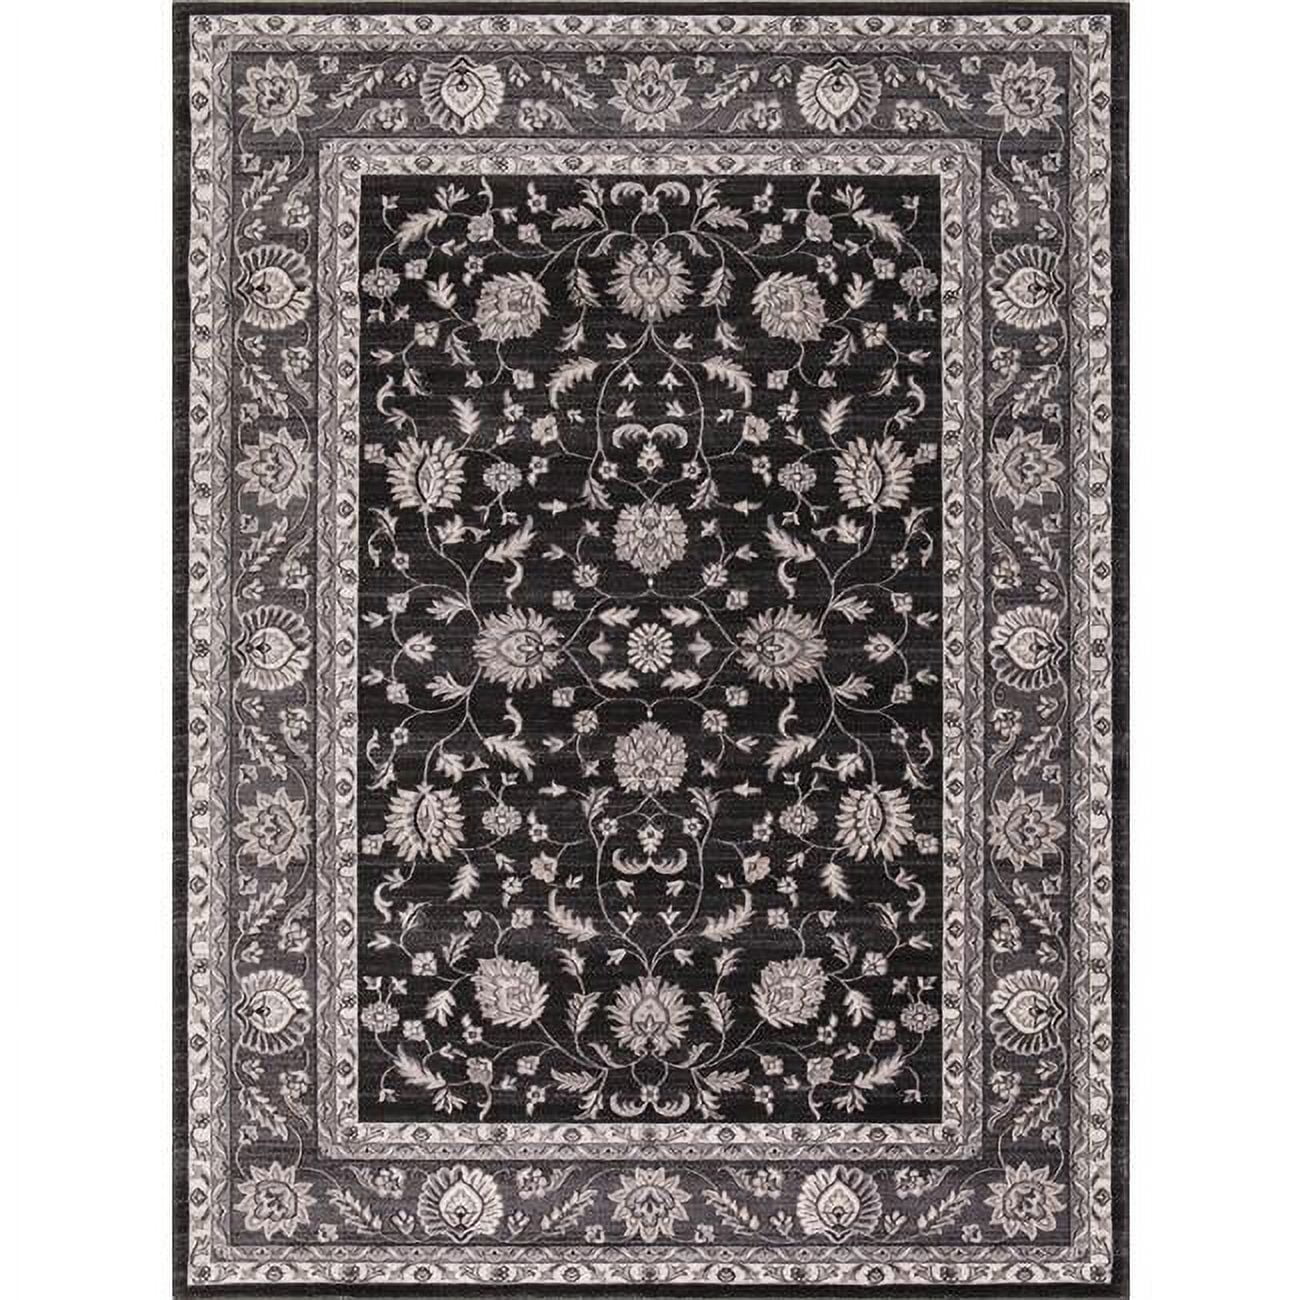 Concord Global 28234 3 Ft. 3 In. X 4 Ft. 7 In. Kashan Mahal - Anthracite